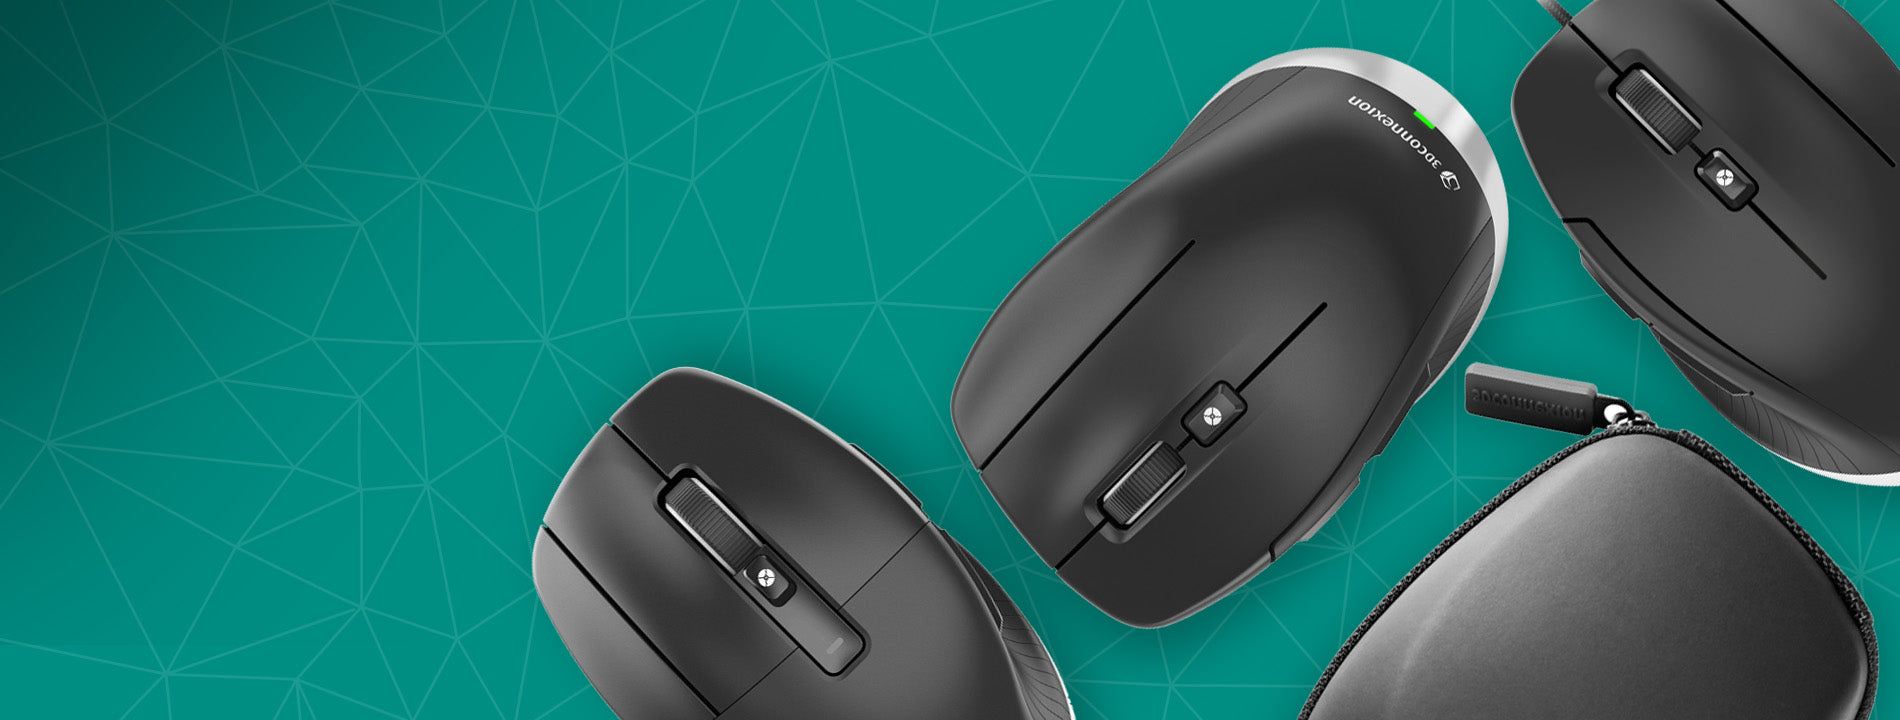 Buy a 3DConnexion SpaceMouse and CadMouse from Canada | 3DMouse.ca